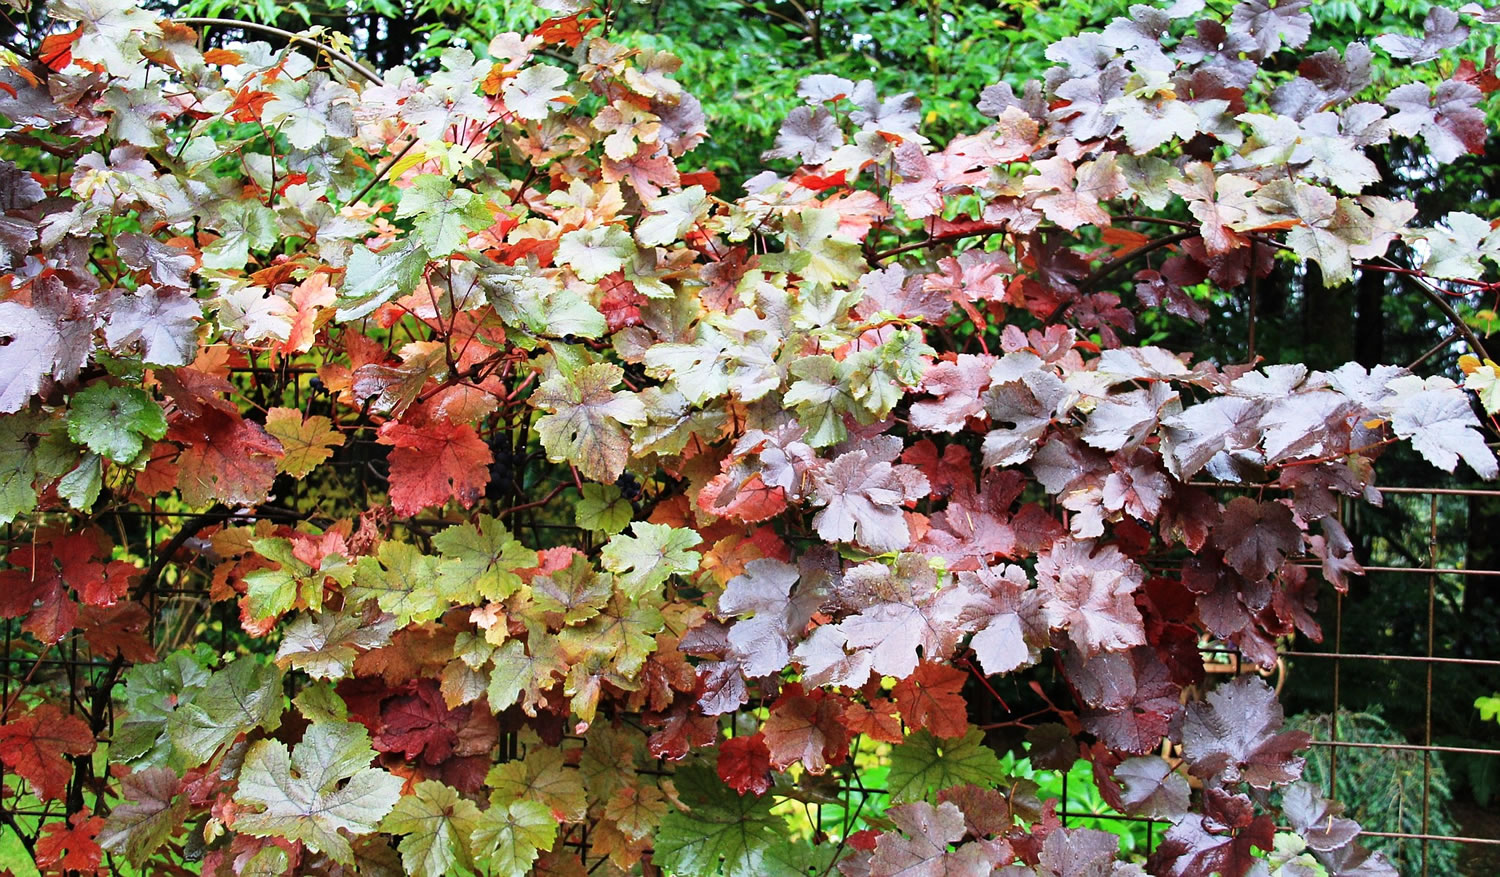 The fall foliage of an ornamental grape holds on even after an early blast of winter weather.